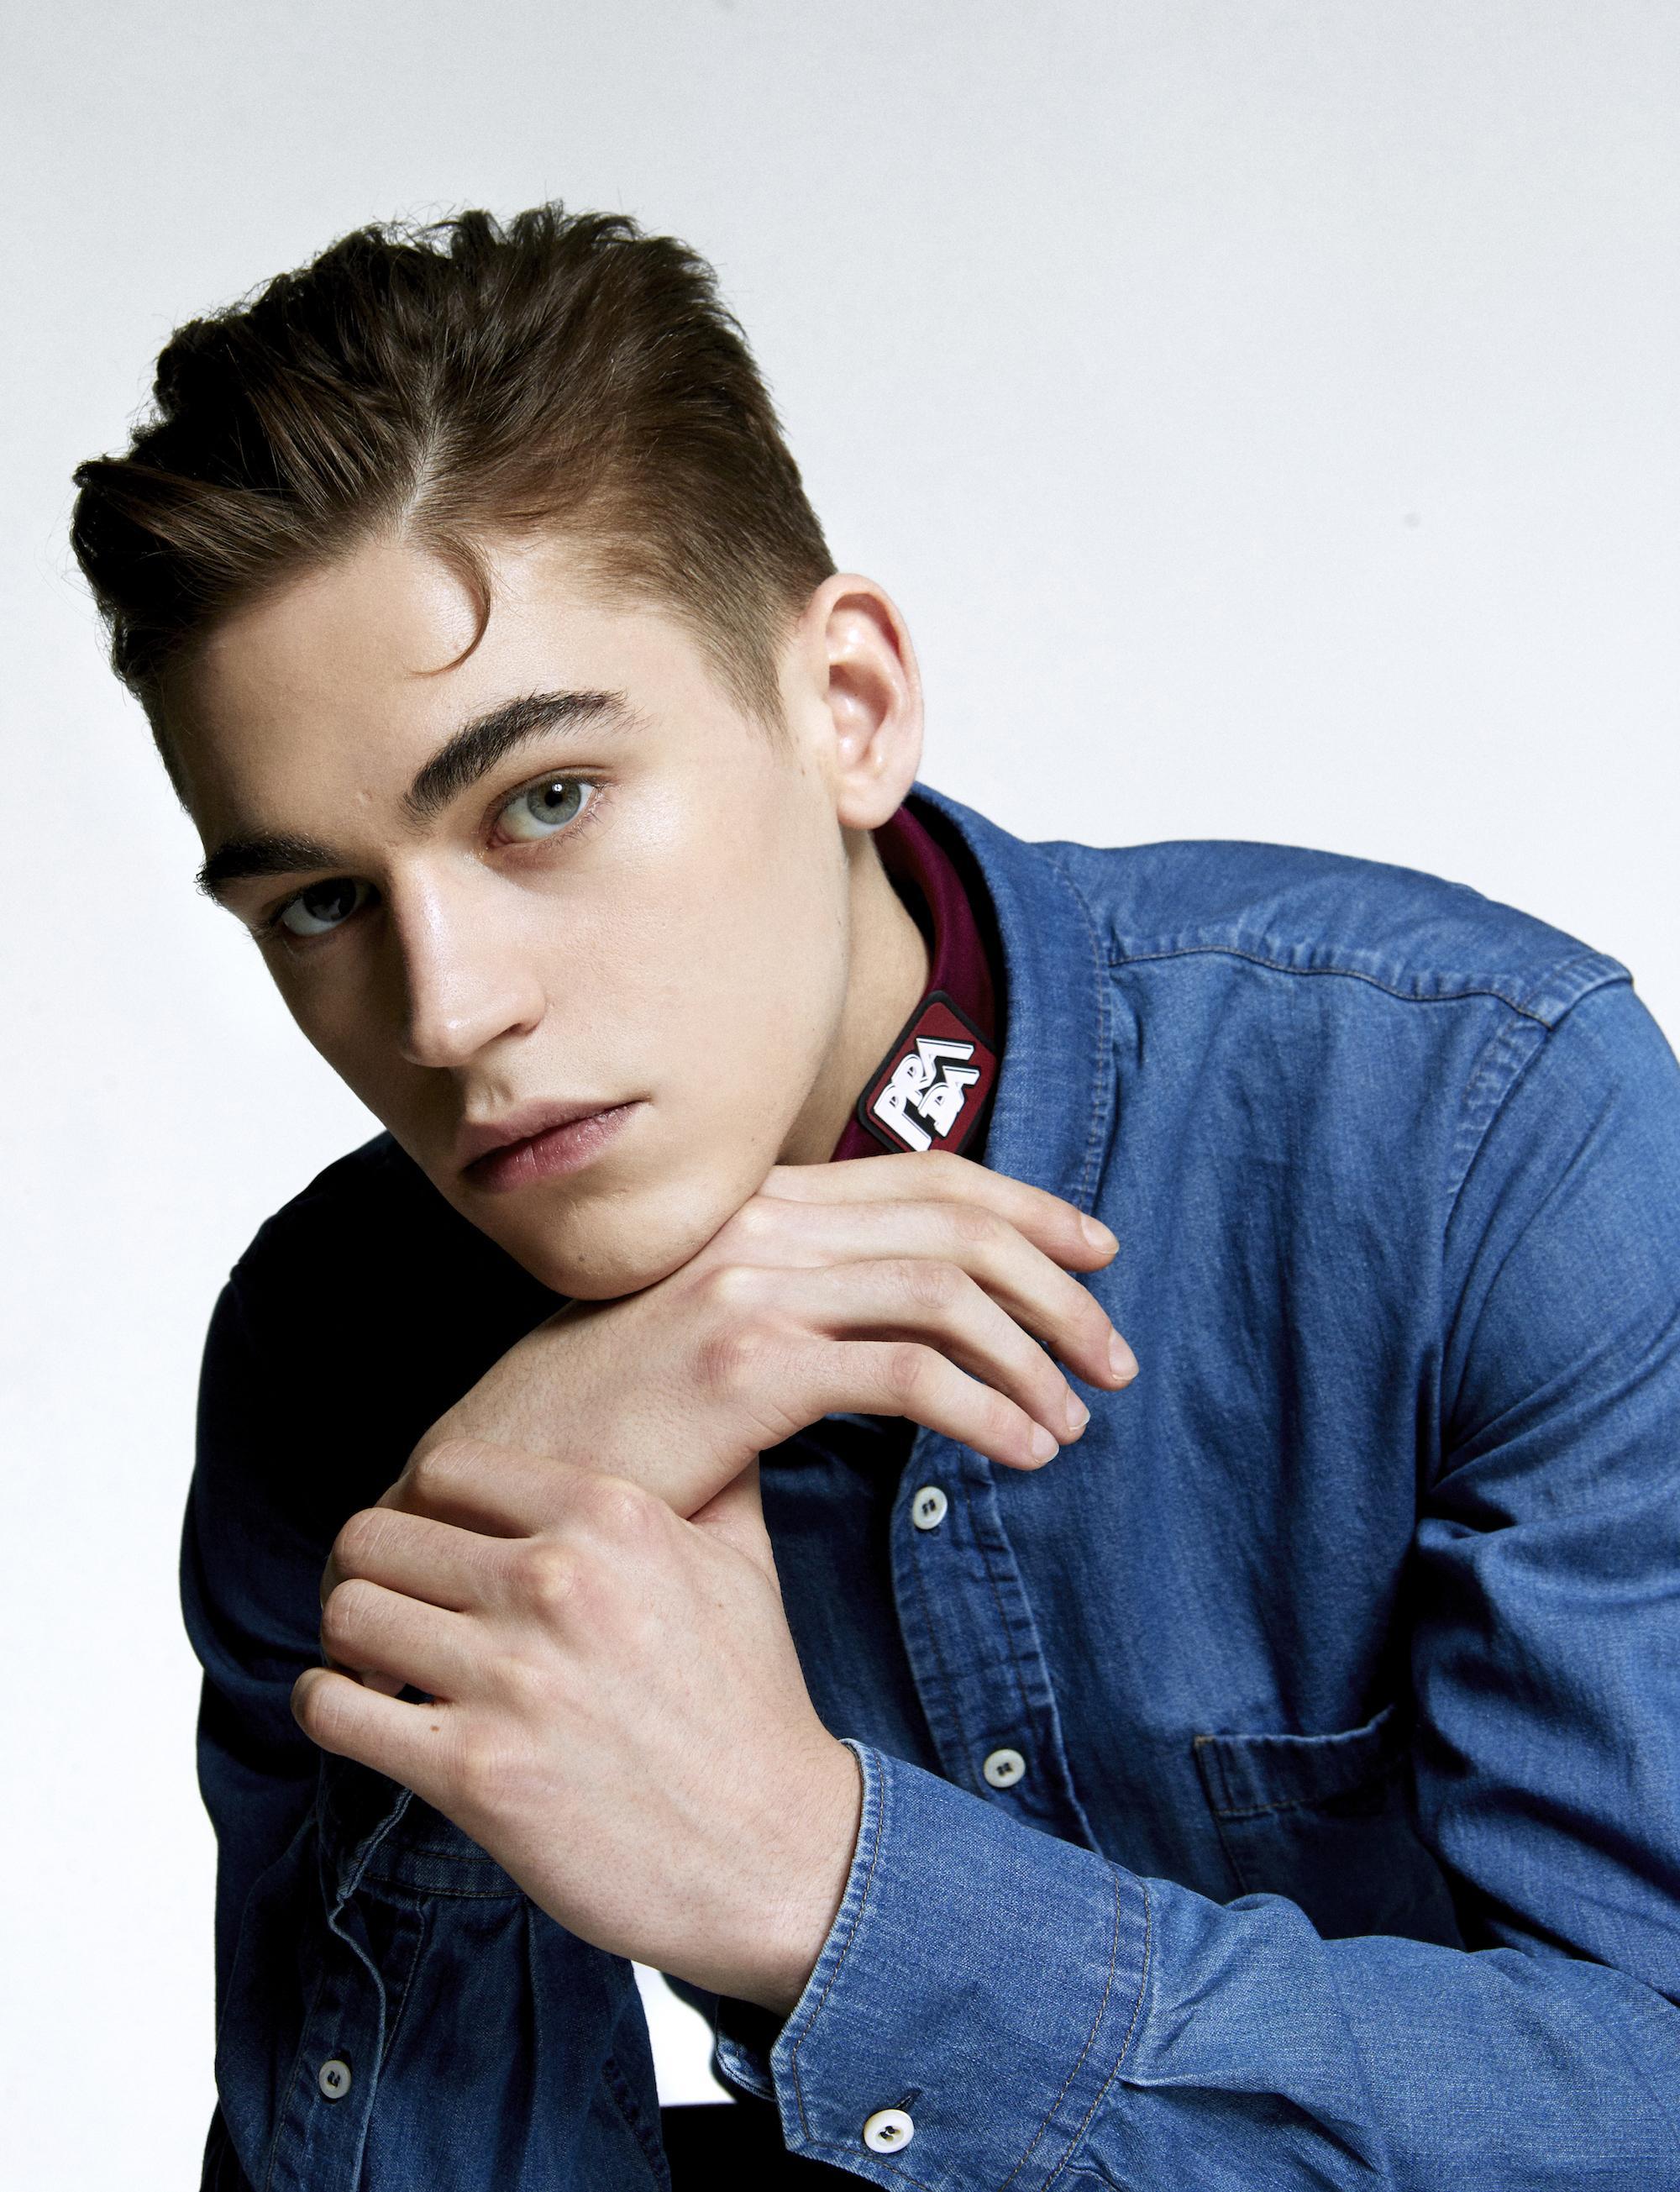 Hero Fiennes Tiffin On Harry Potter And His Star Making Role